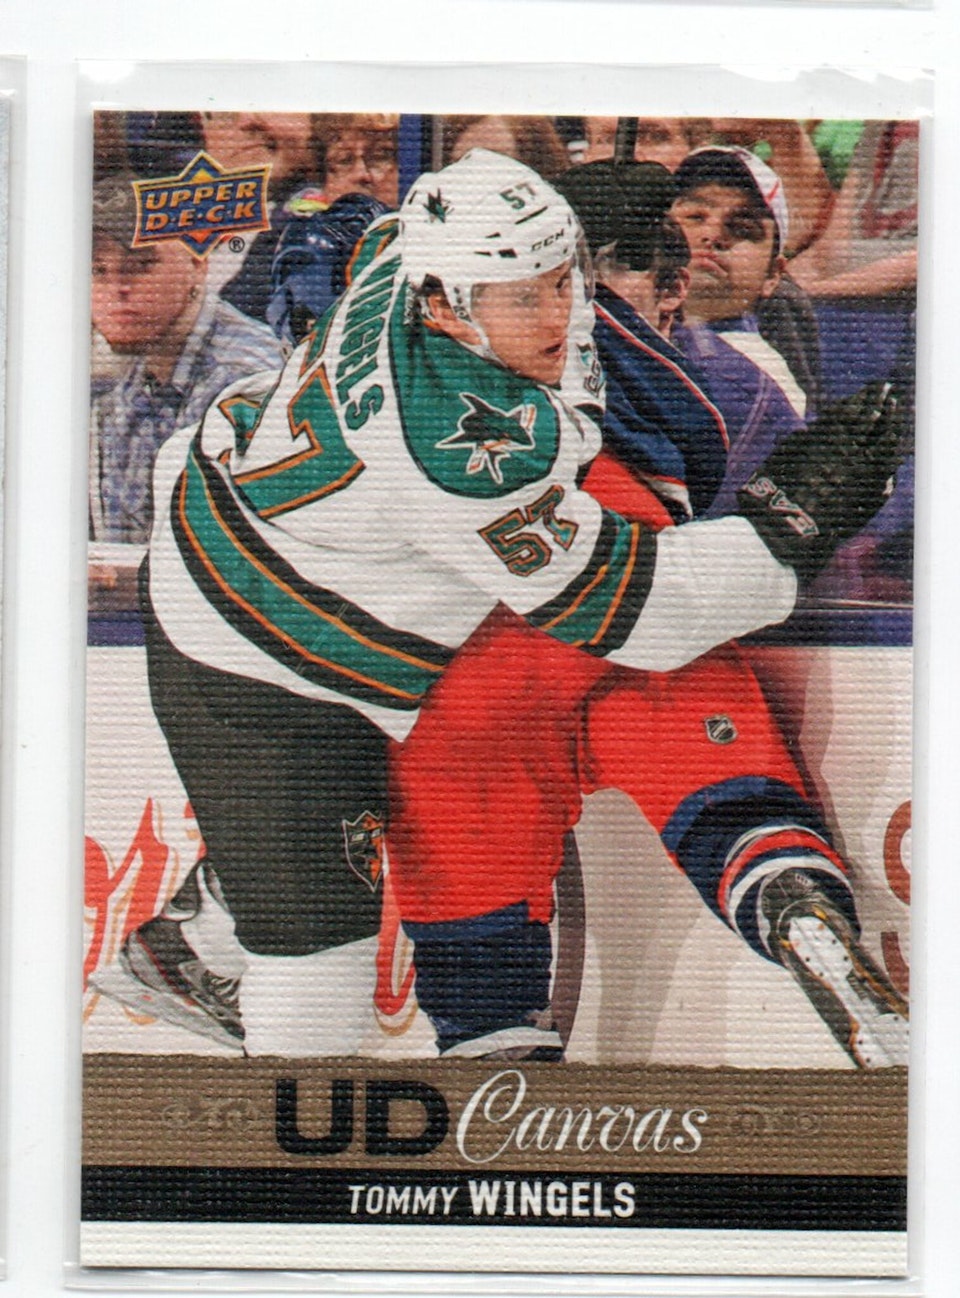 2013-14 Upper Deck Canvas #C87 Tommy Wingels (10-X227-SHARKS)